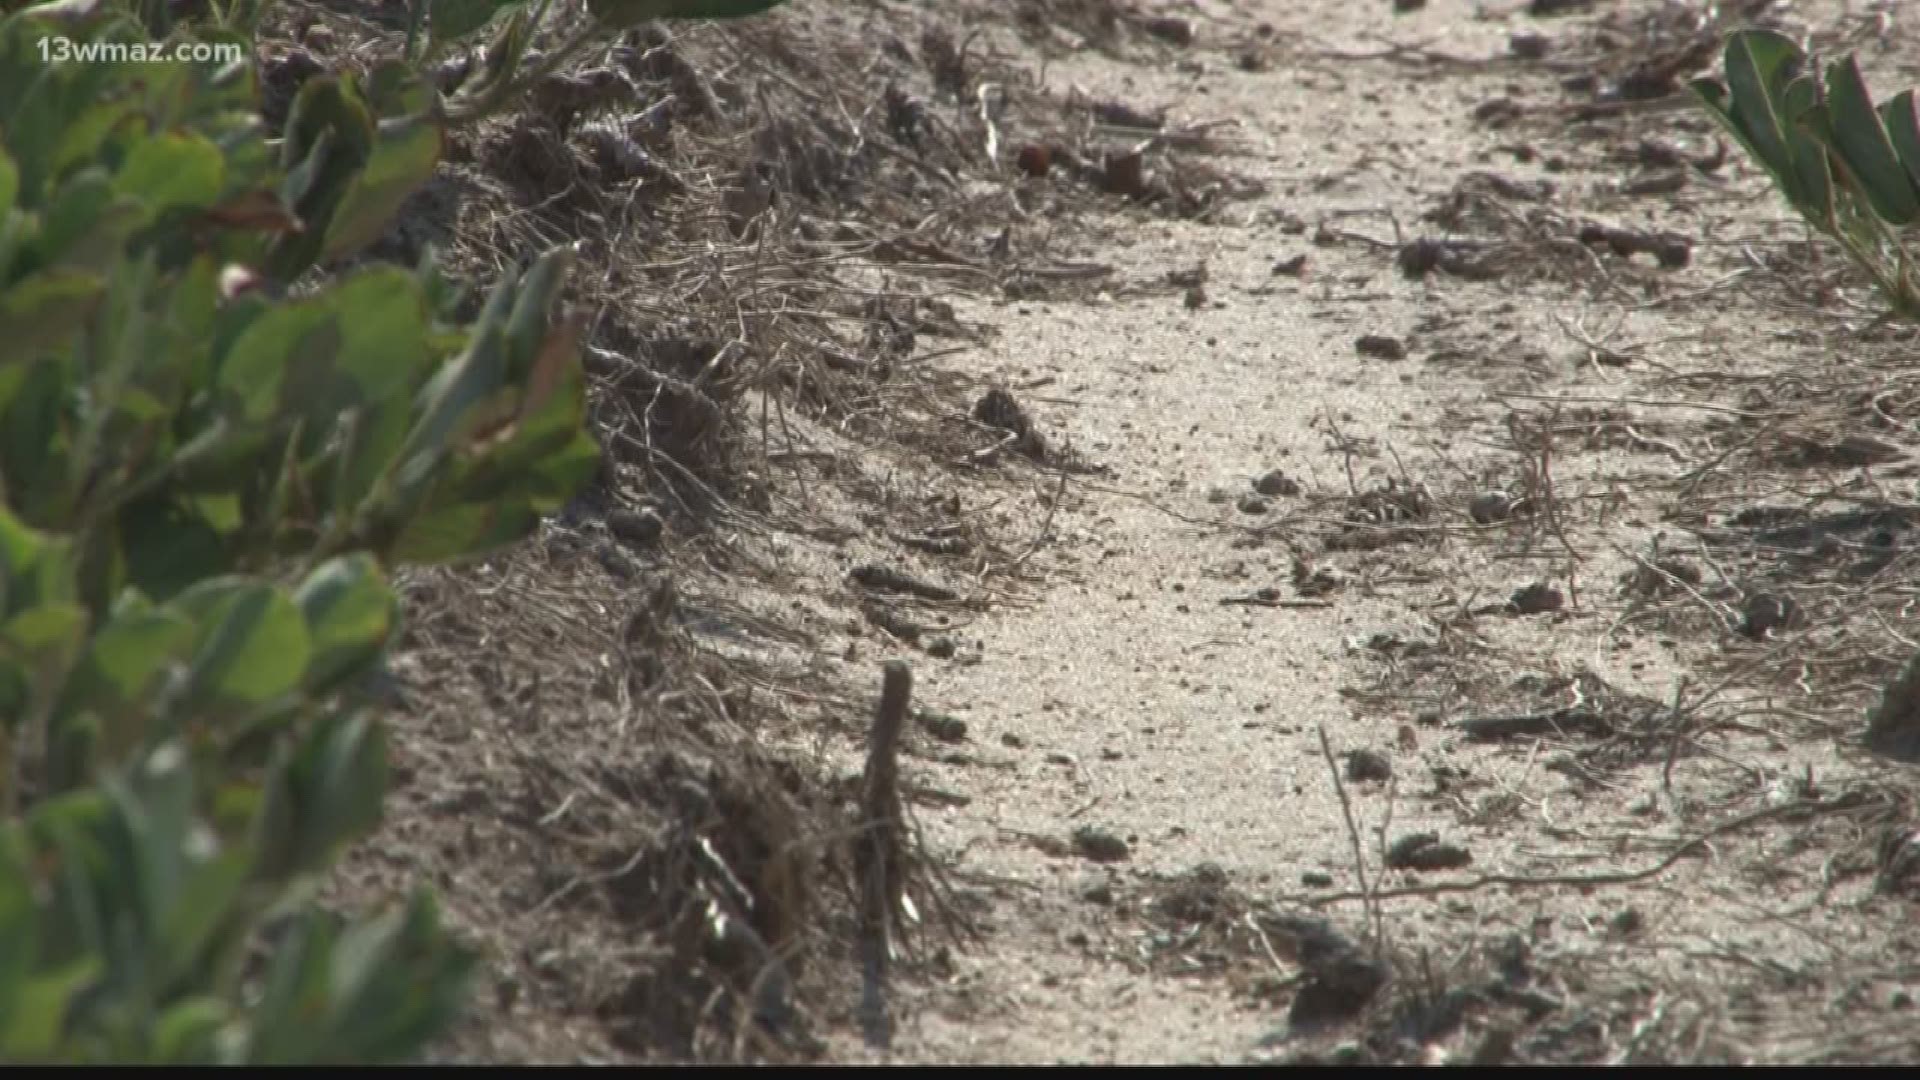 Wilkinson County is one of the areas in extreme drought in Central Georgia. That makes it hard for farmers trying to turn a profit this year.